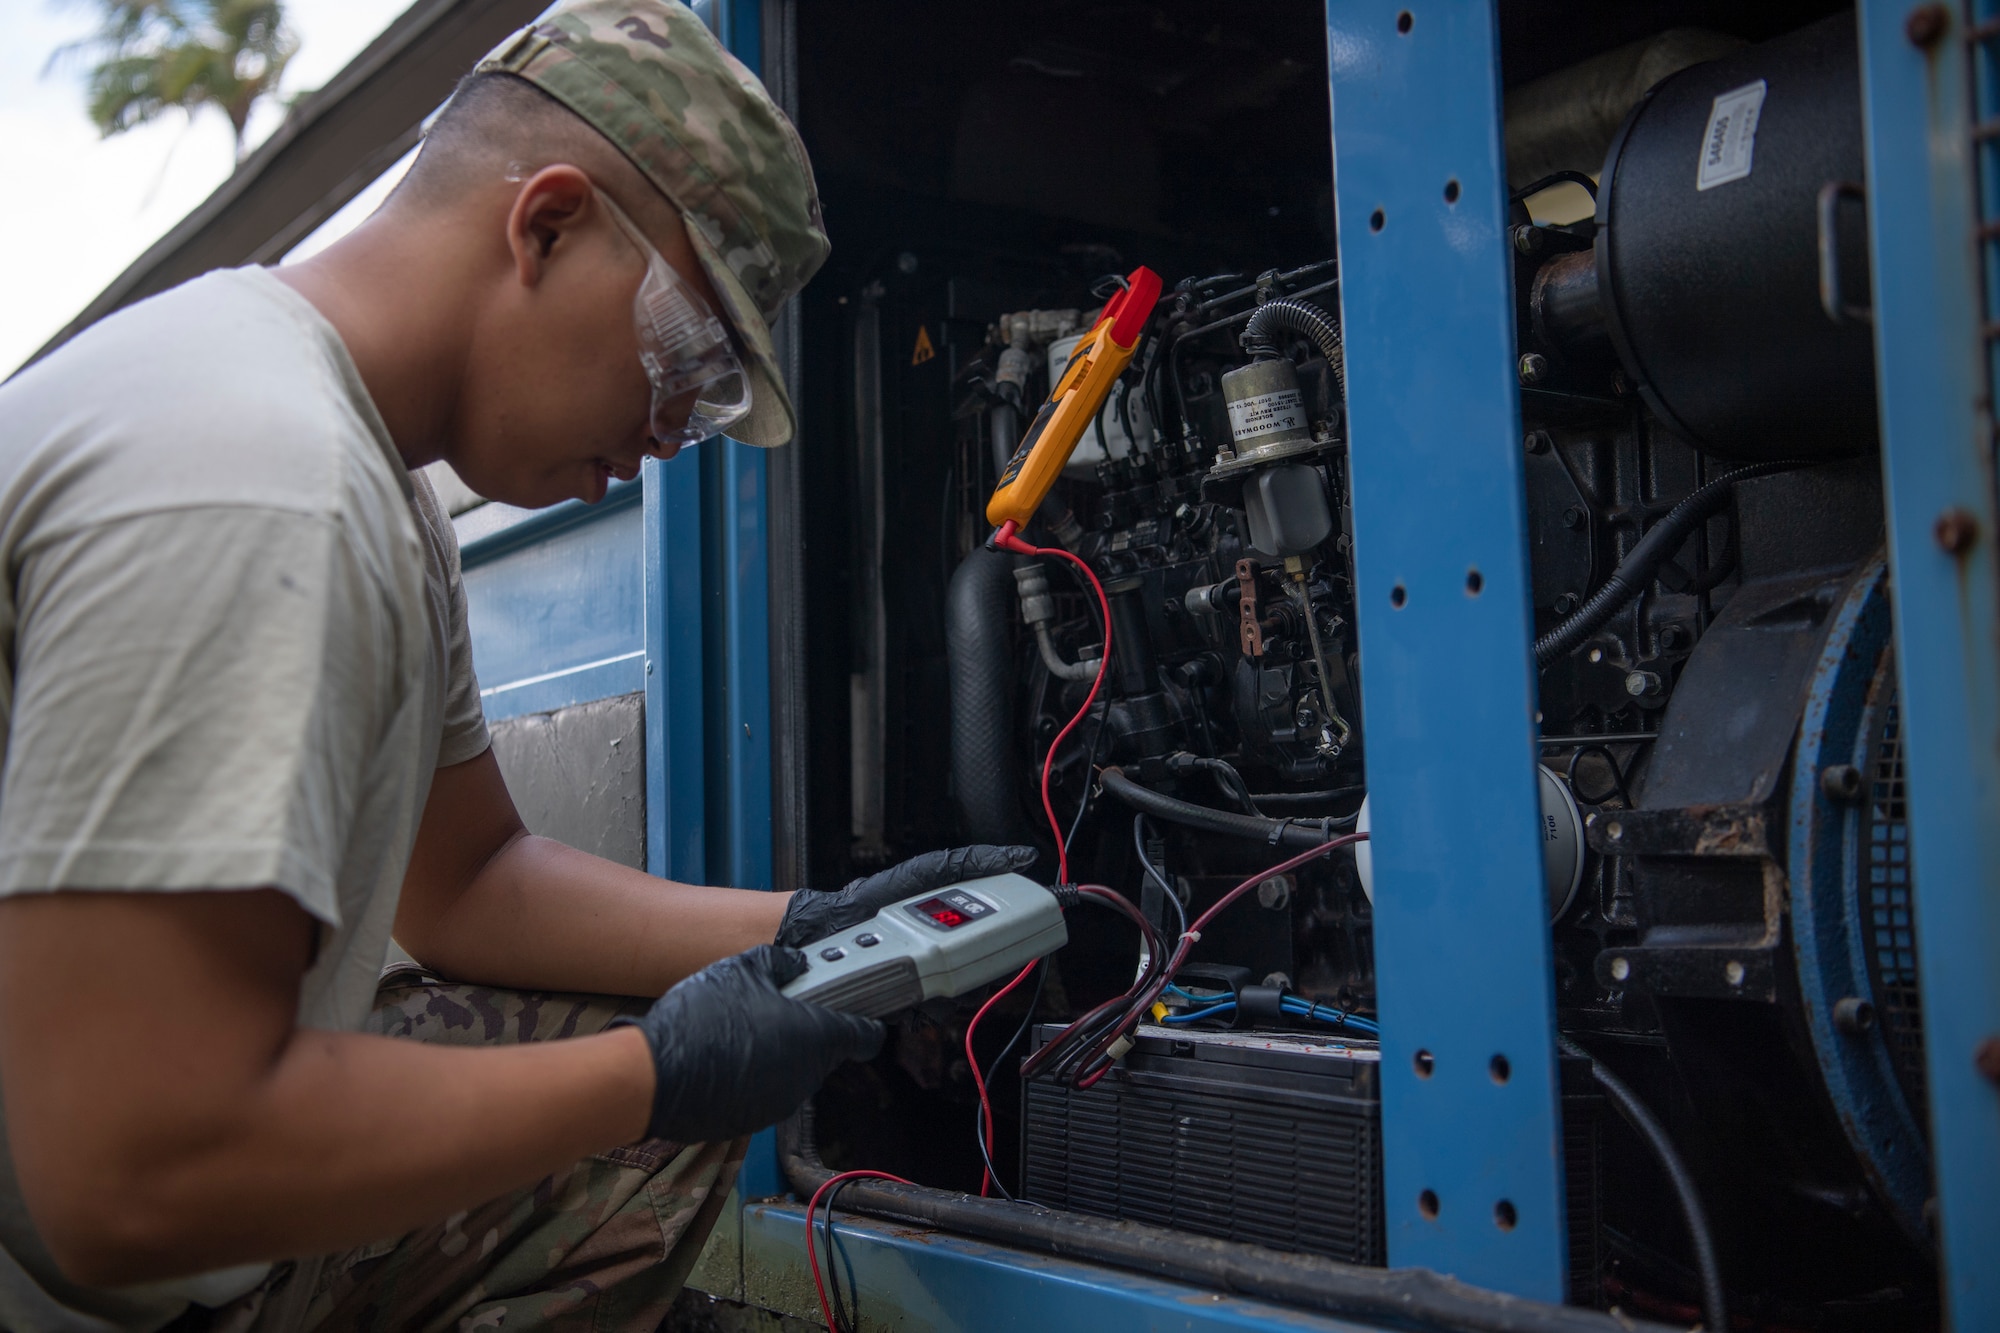 U.S. Air Force Staff Sgt. Gabriel Carias, 624th Civil Engineer Squadron electrical power production craftsman, checks the battery of an electrical generator at Bellows Air Force Station, Hawaii, Jan. 25, 2020.